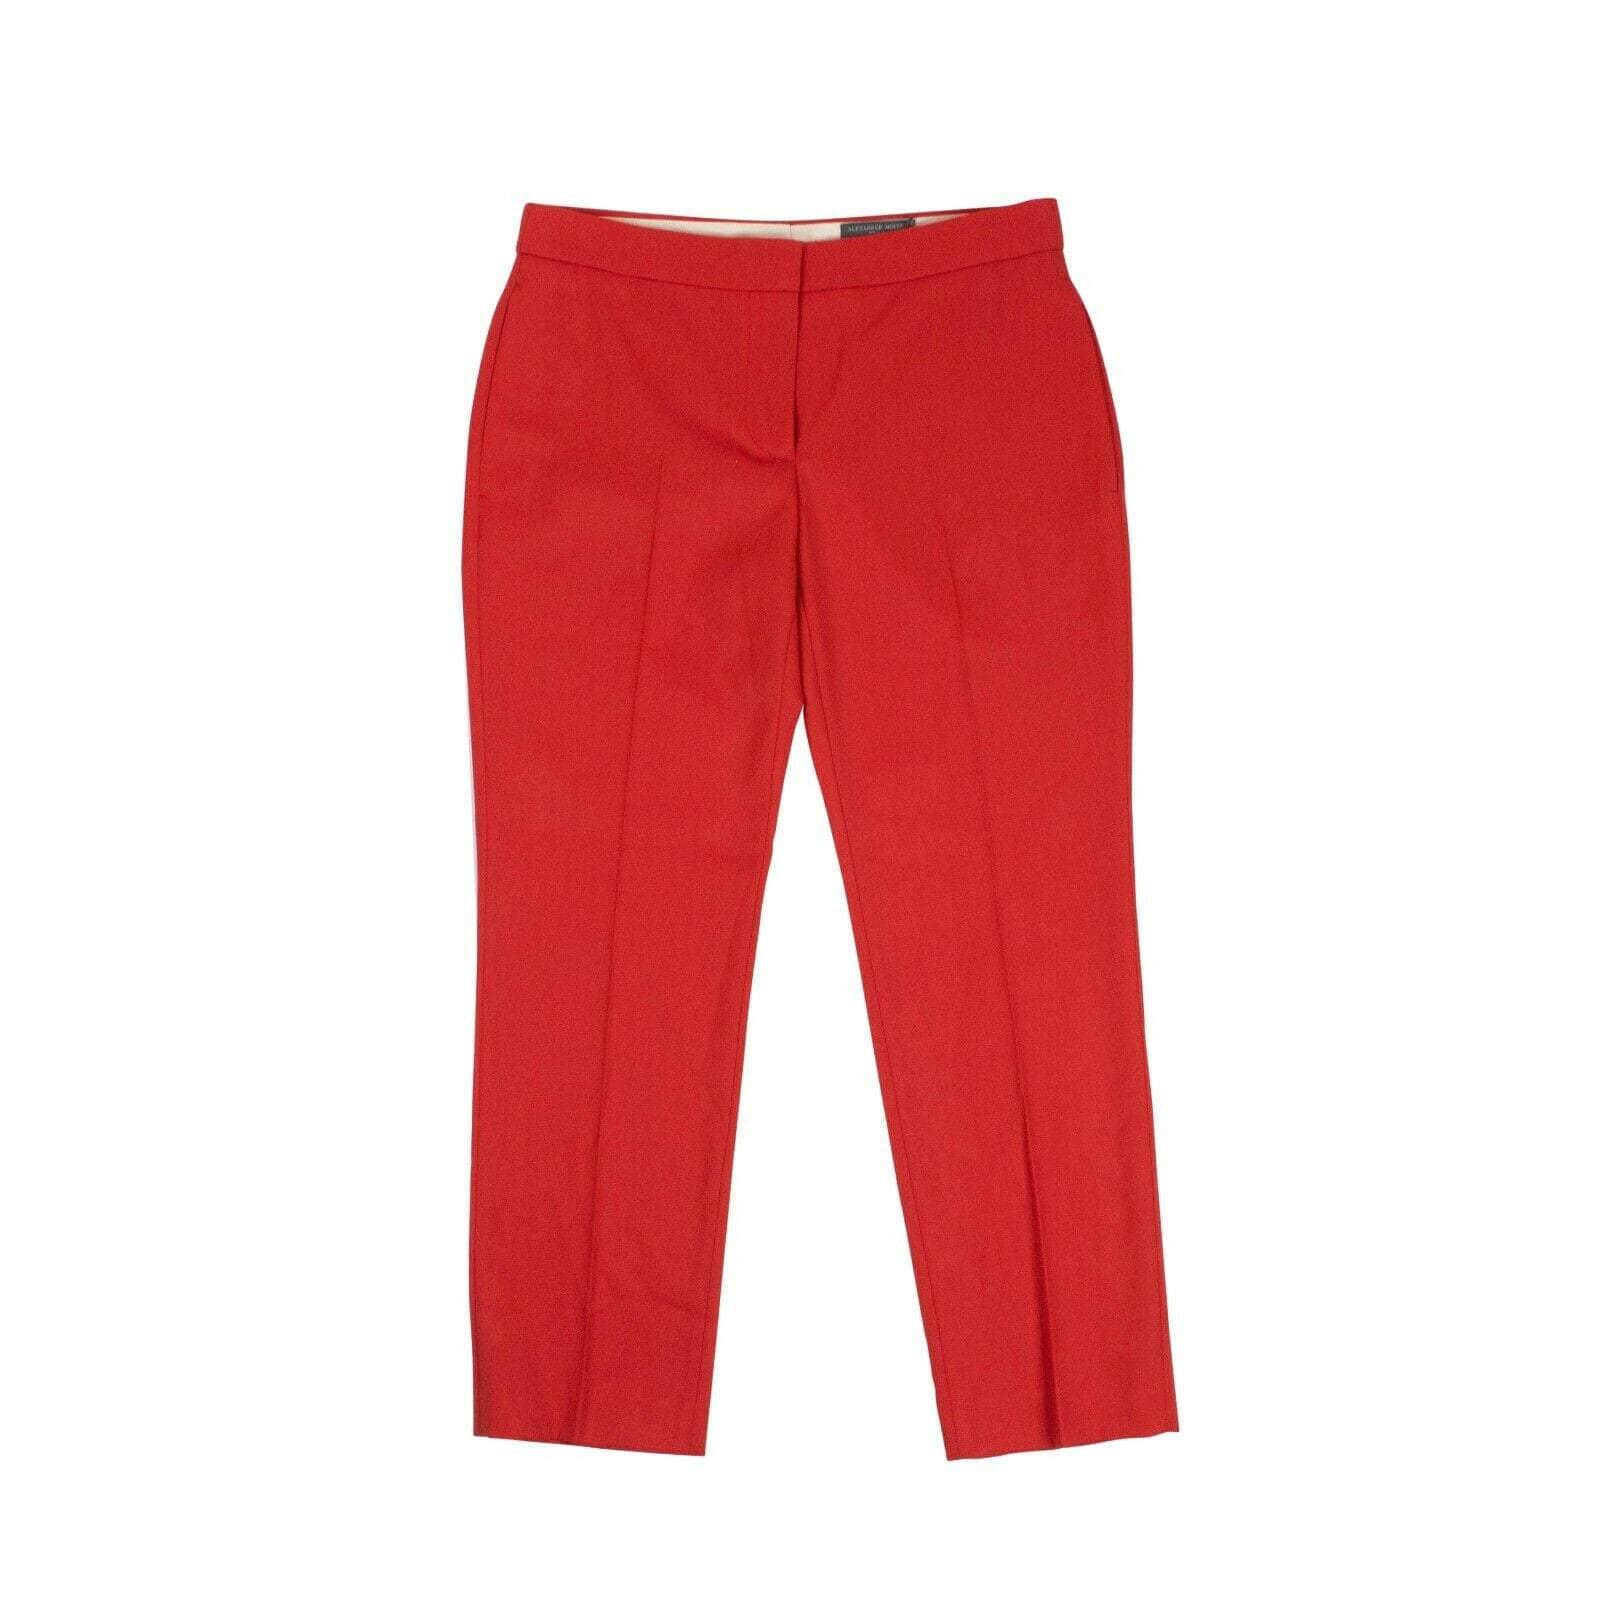 Alexander McQueen Women's Pants 40/4-6 Cropped Tailored Pants - Red 75LE-76/40 75LE-76/40